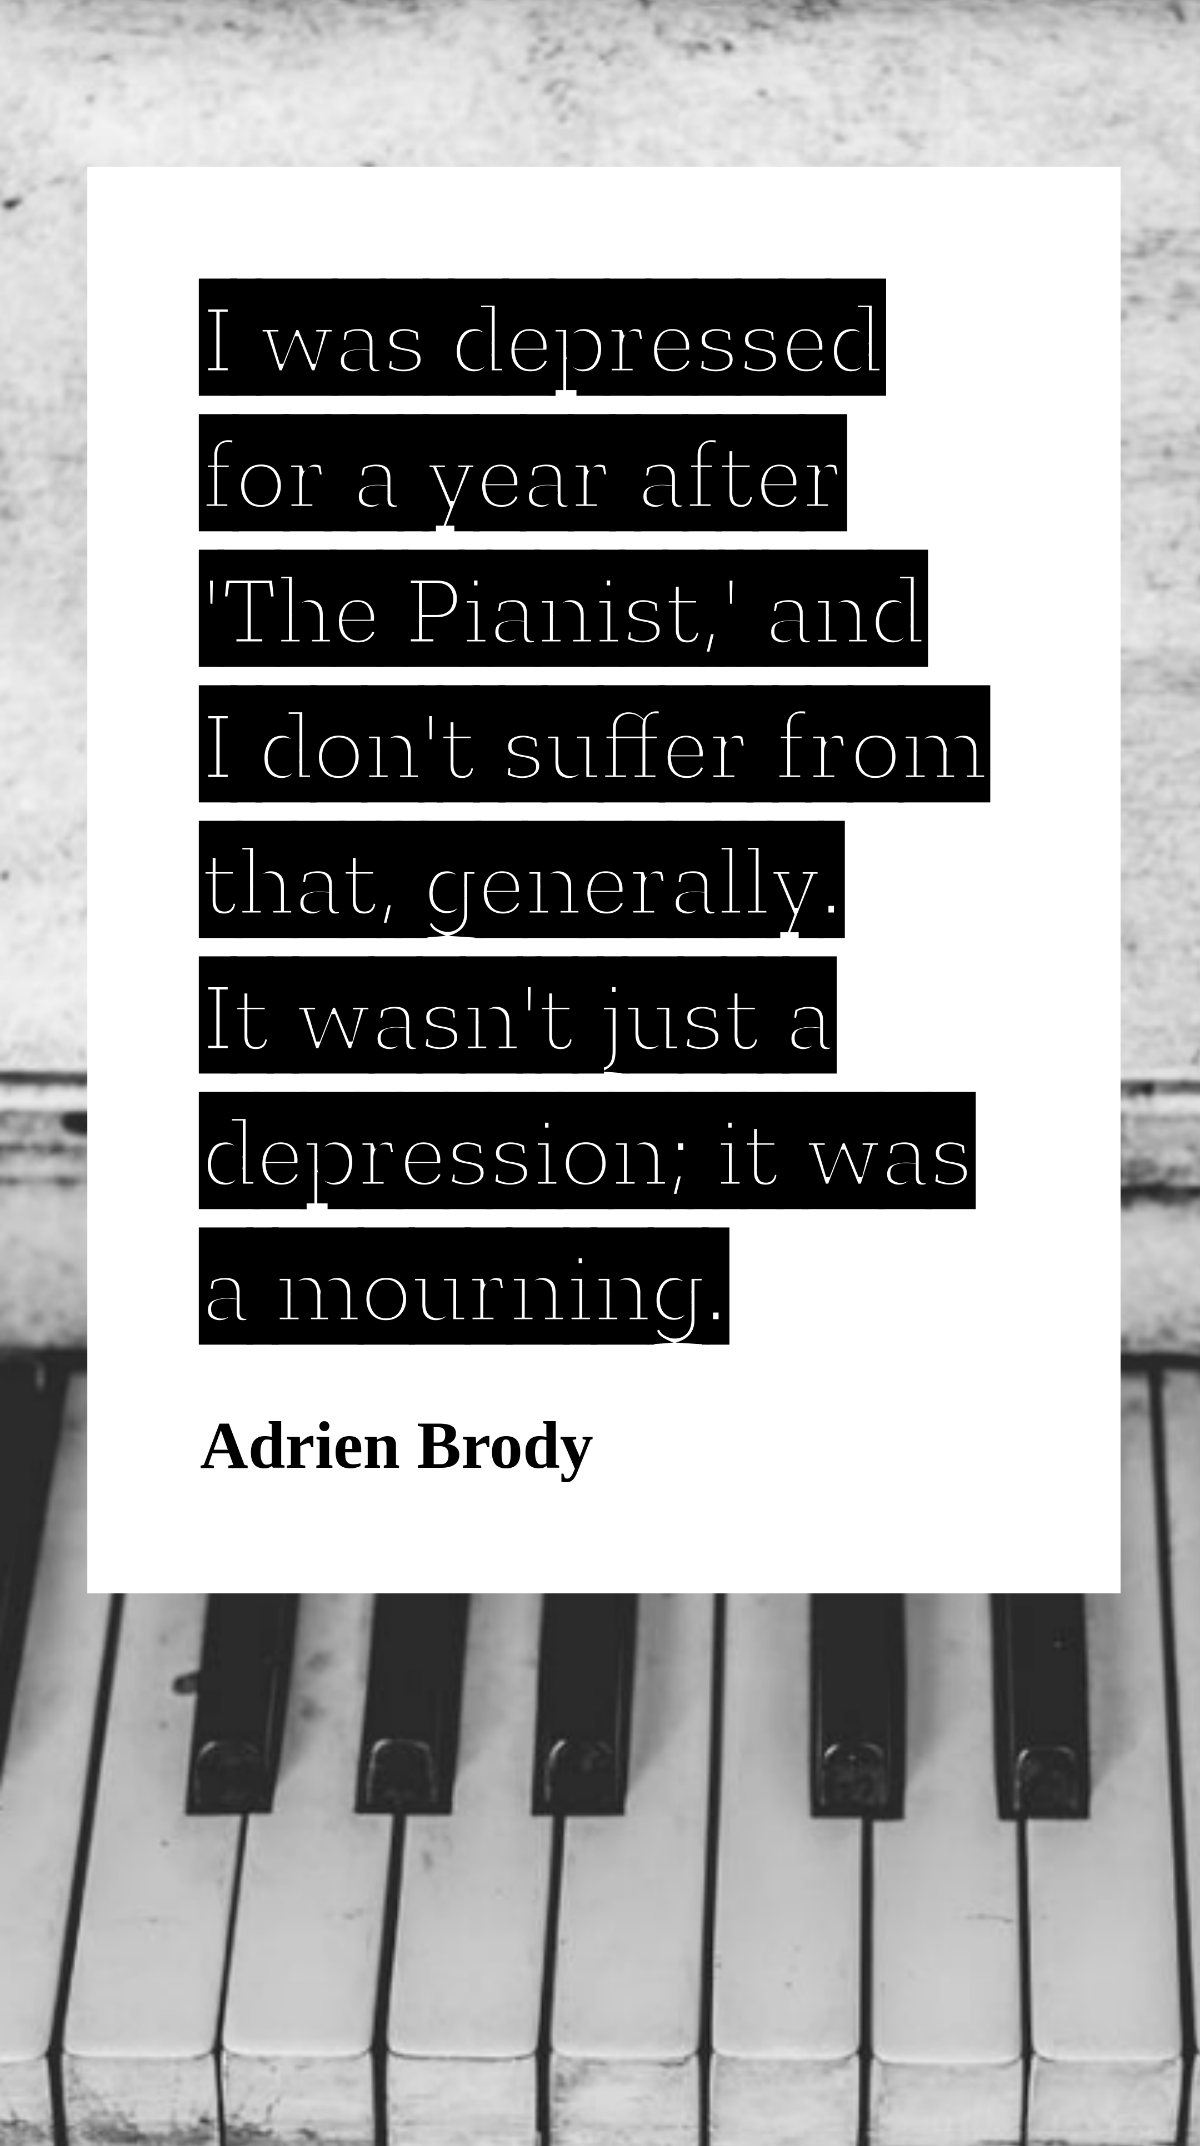 Adrien Brody - I was depressed for a year after 'The Pianist,' and I don't suffer from that, generally. It wasn't just a depression; it was a mourning. Template